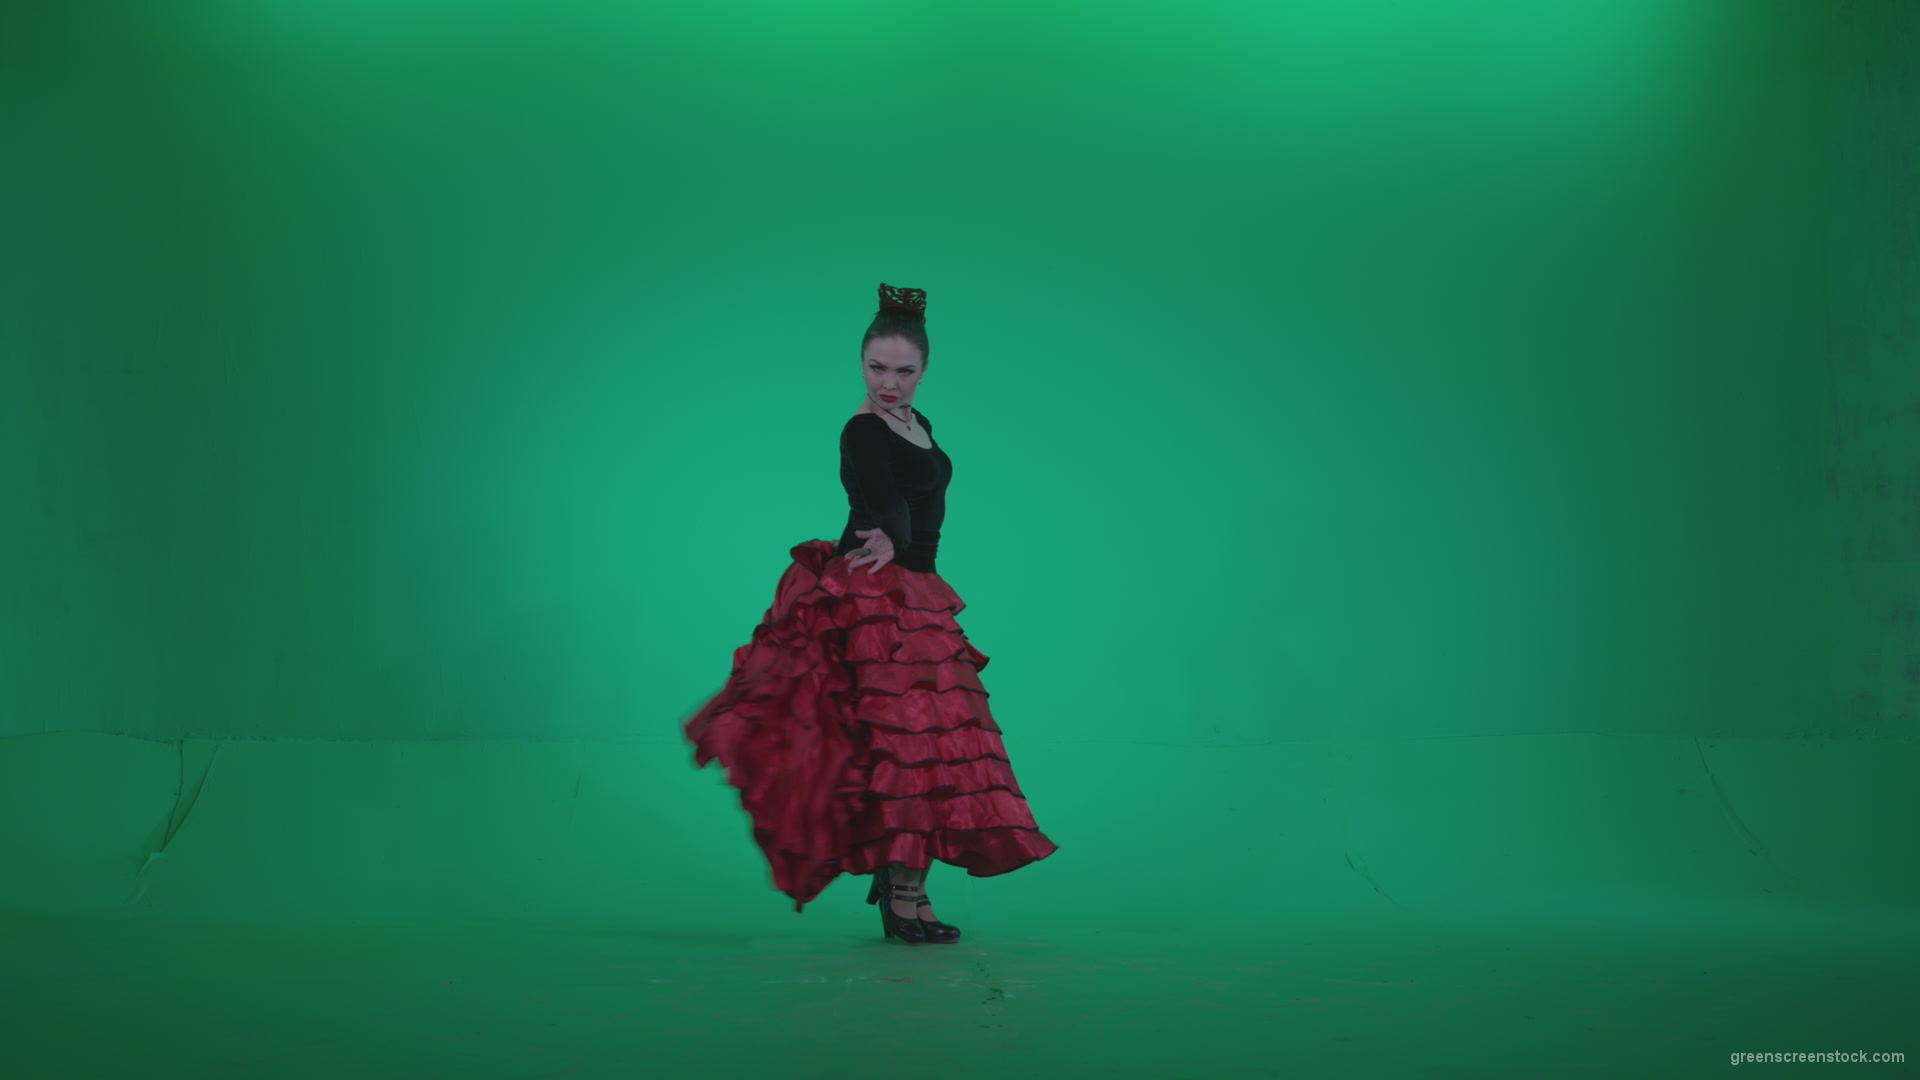 Flamenco-Red-and-Black-Dress-rb5-Green-Screen-Video-Footage_004 Green Screen Stock